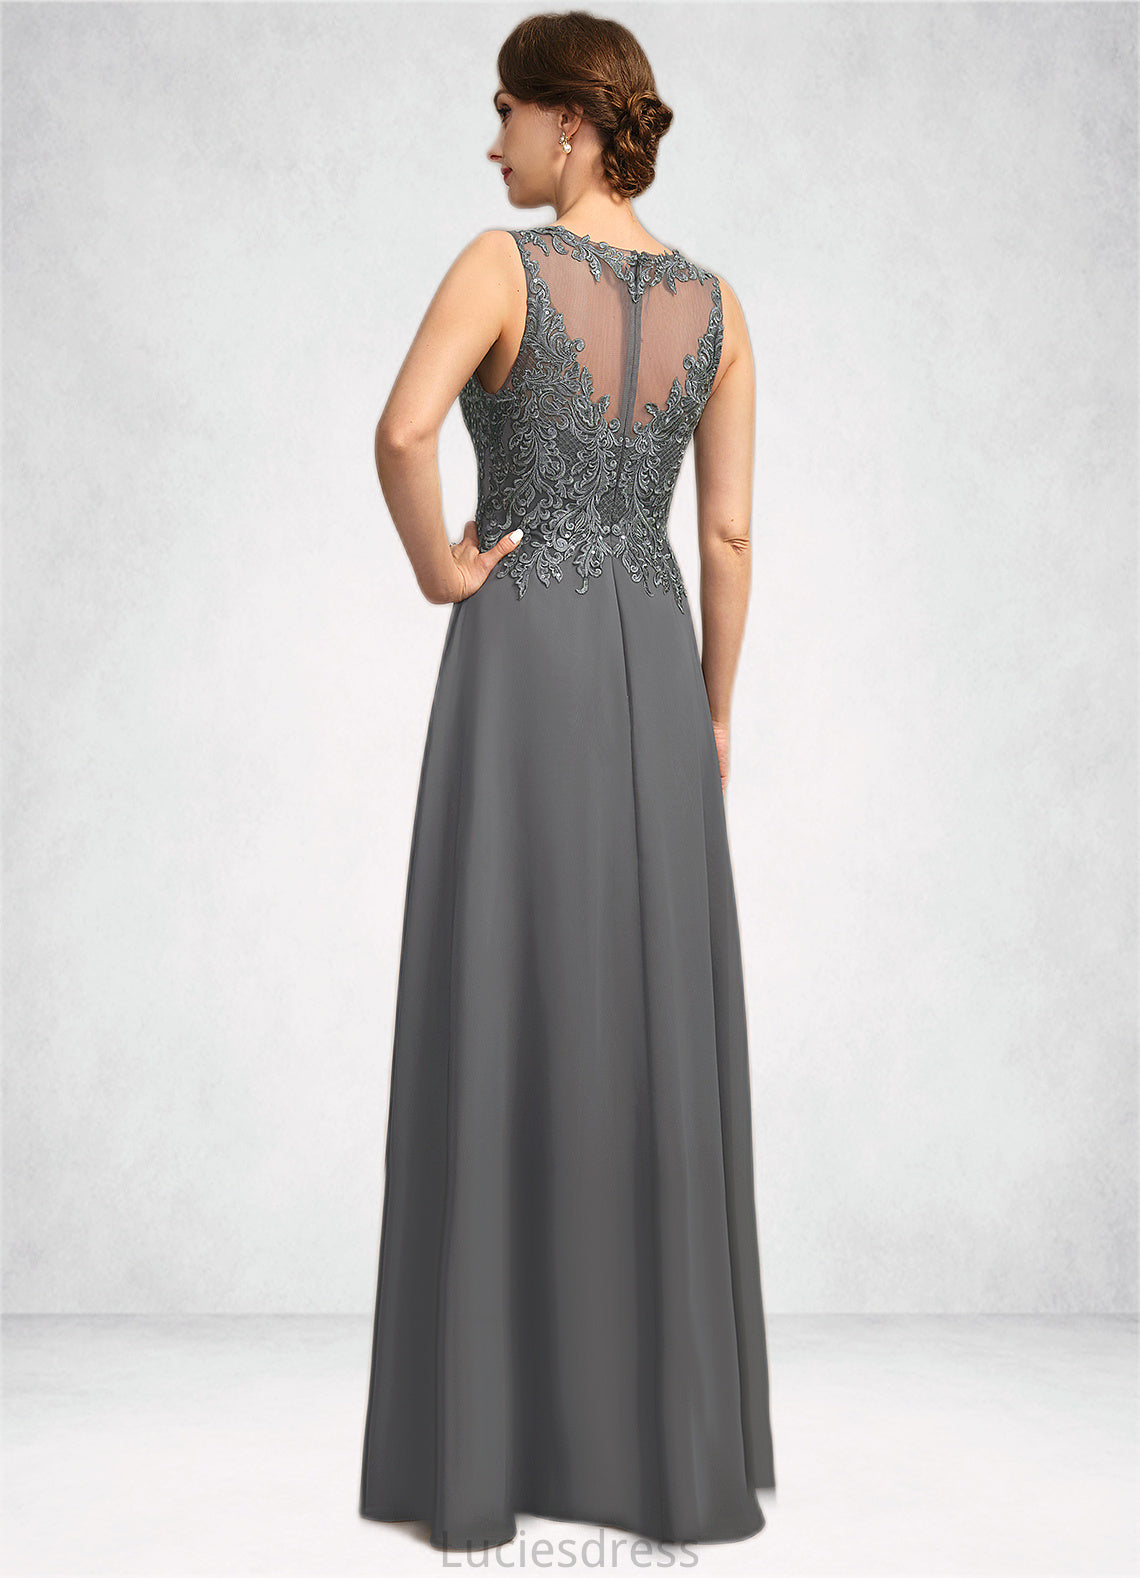 Valentina A-line Scoop Illusion Floor-Length Chiffon Lace Mother of the Bride Dress With Sequins HFP0021921